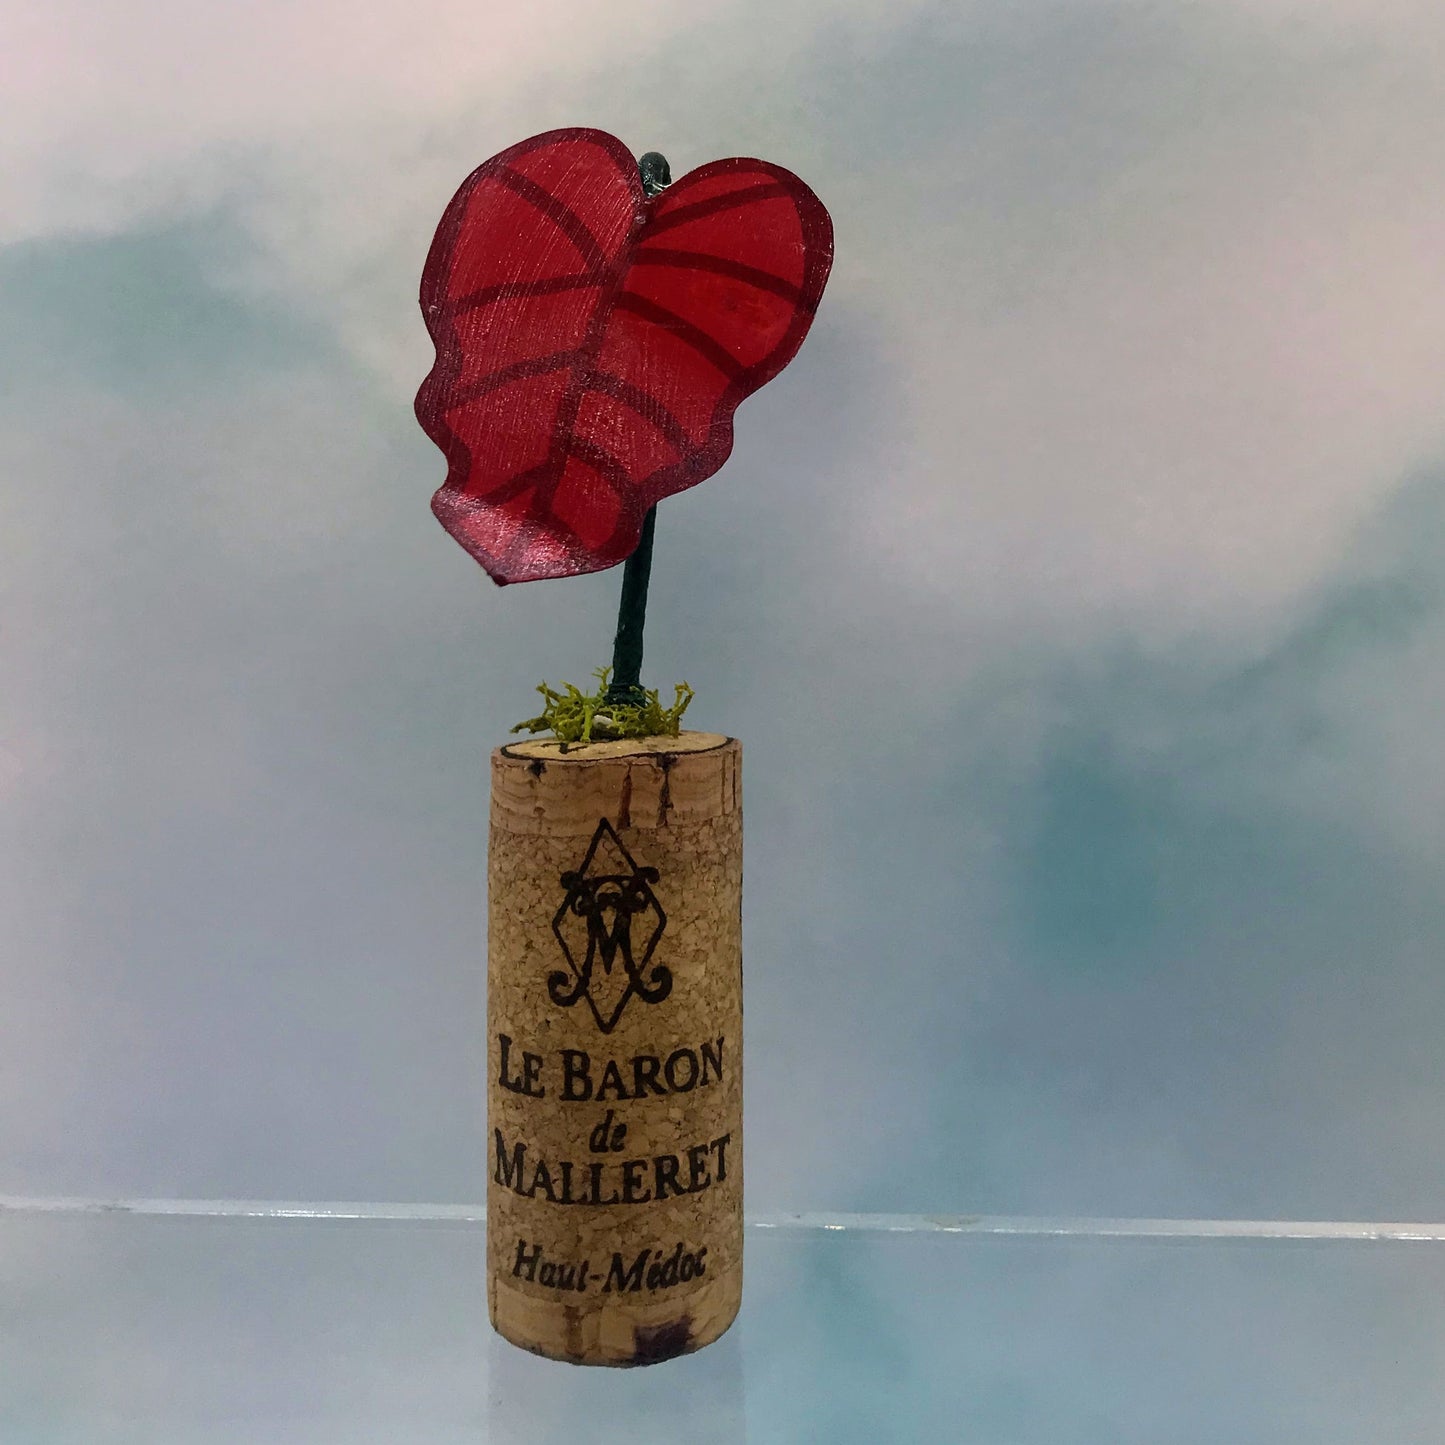 Tiny Magical Paper House Plant in Upcycled Cork - DECORATIVE MAGNET